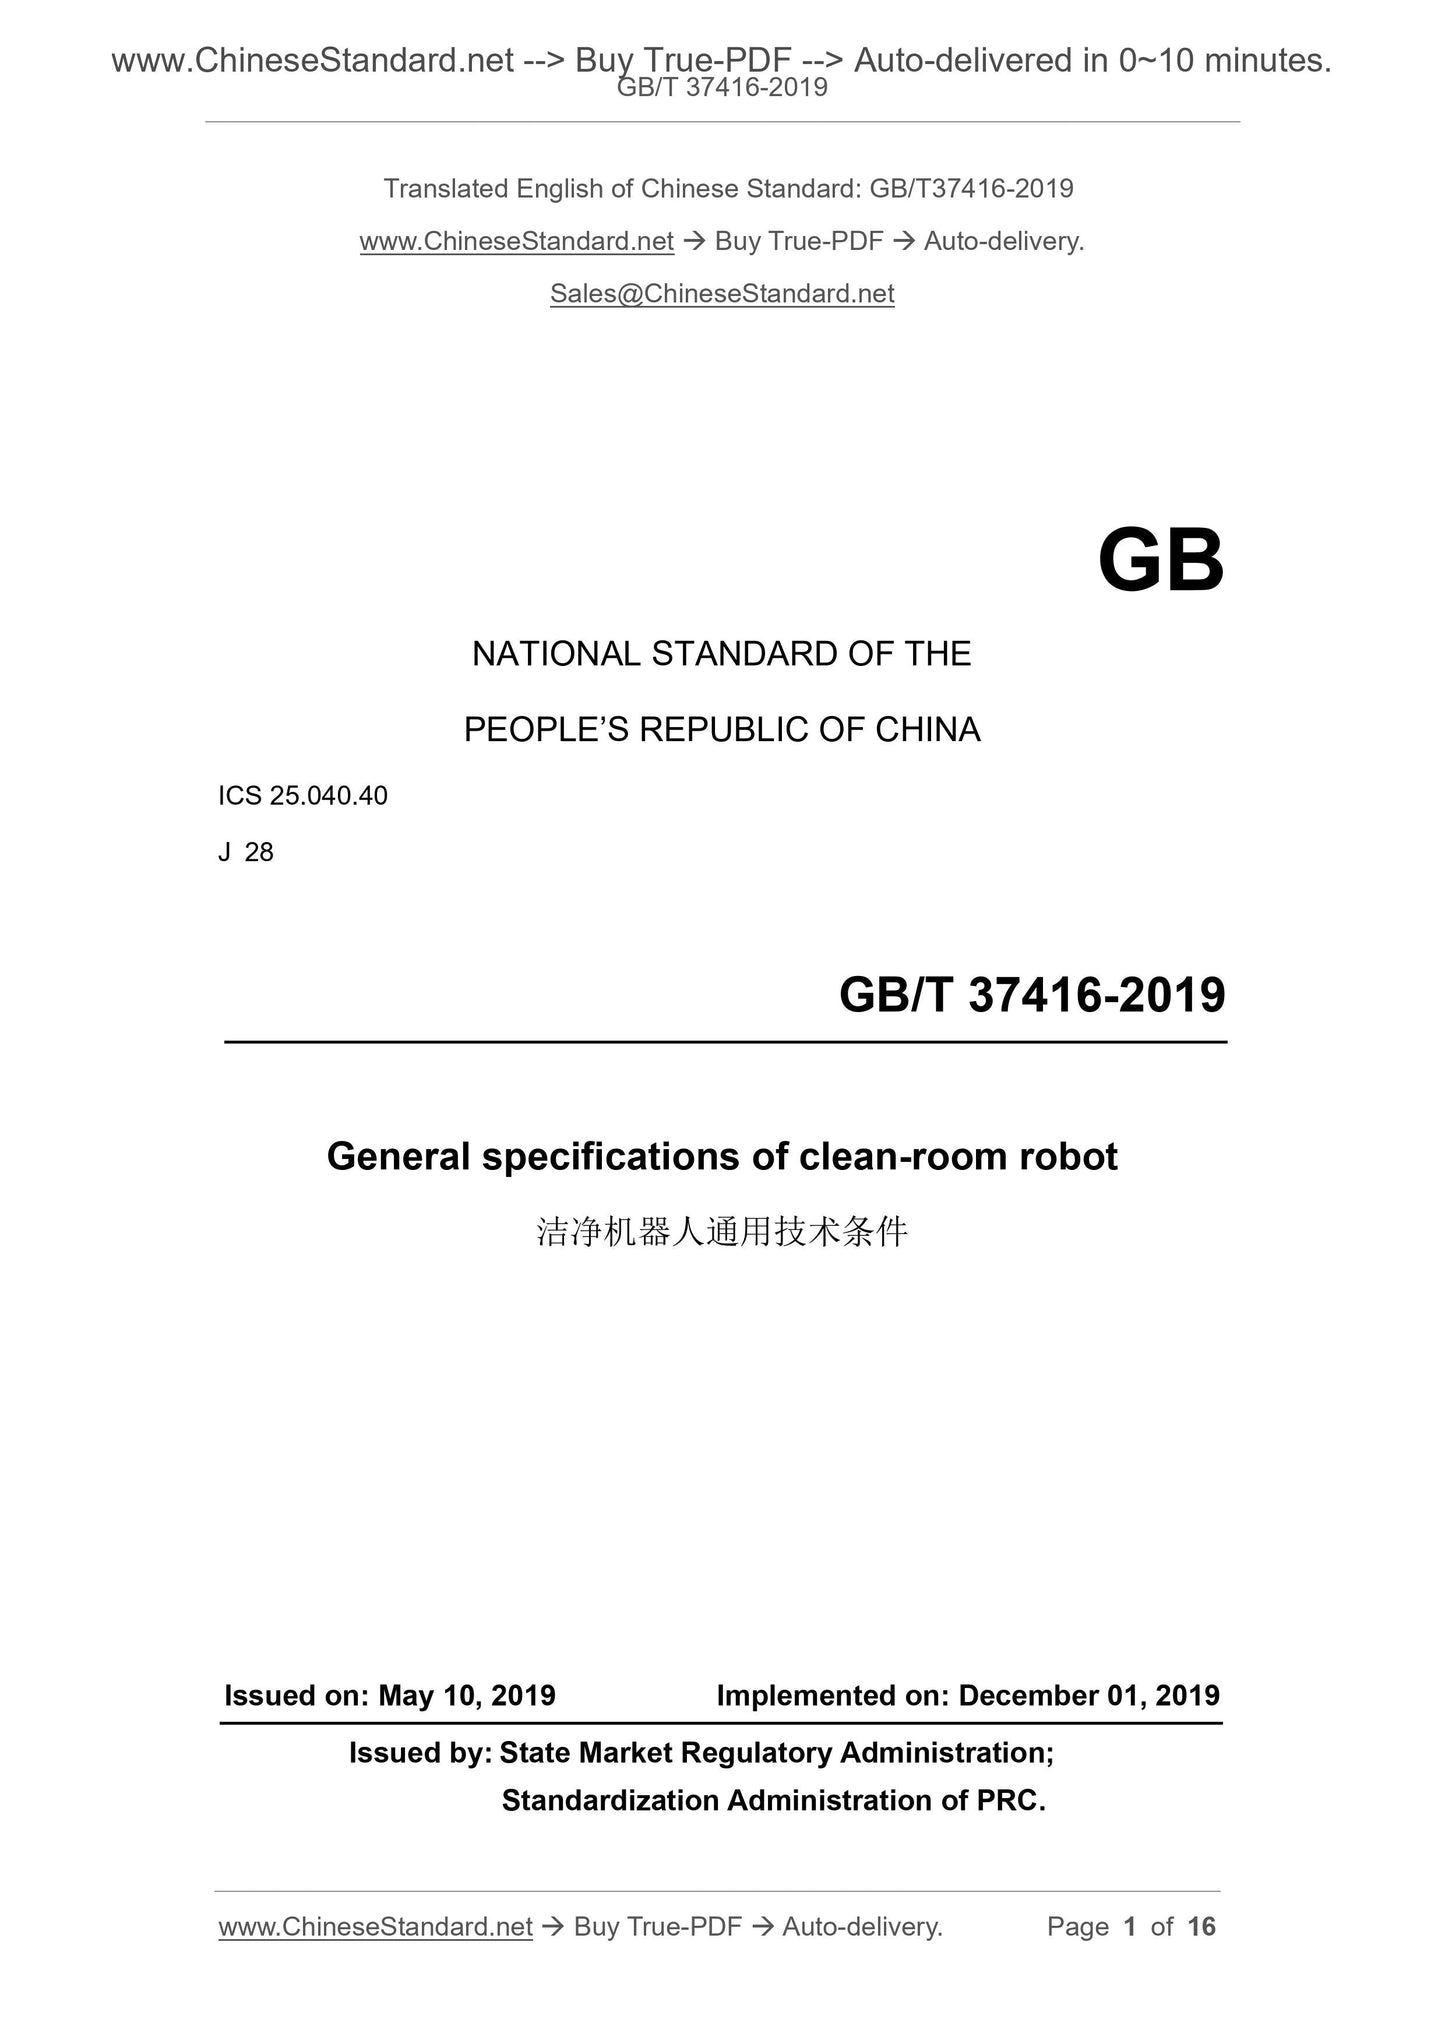 GB/T 37416-2019 Page 1